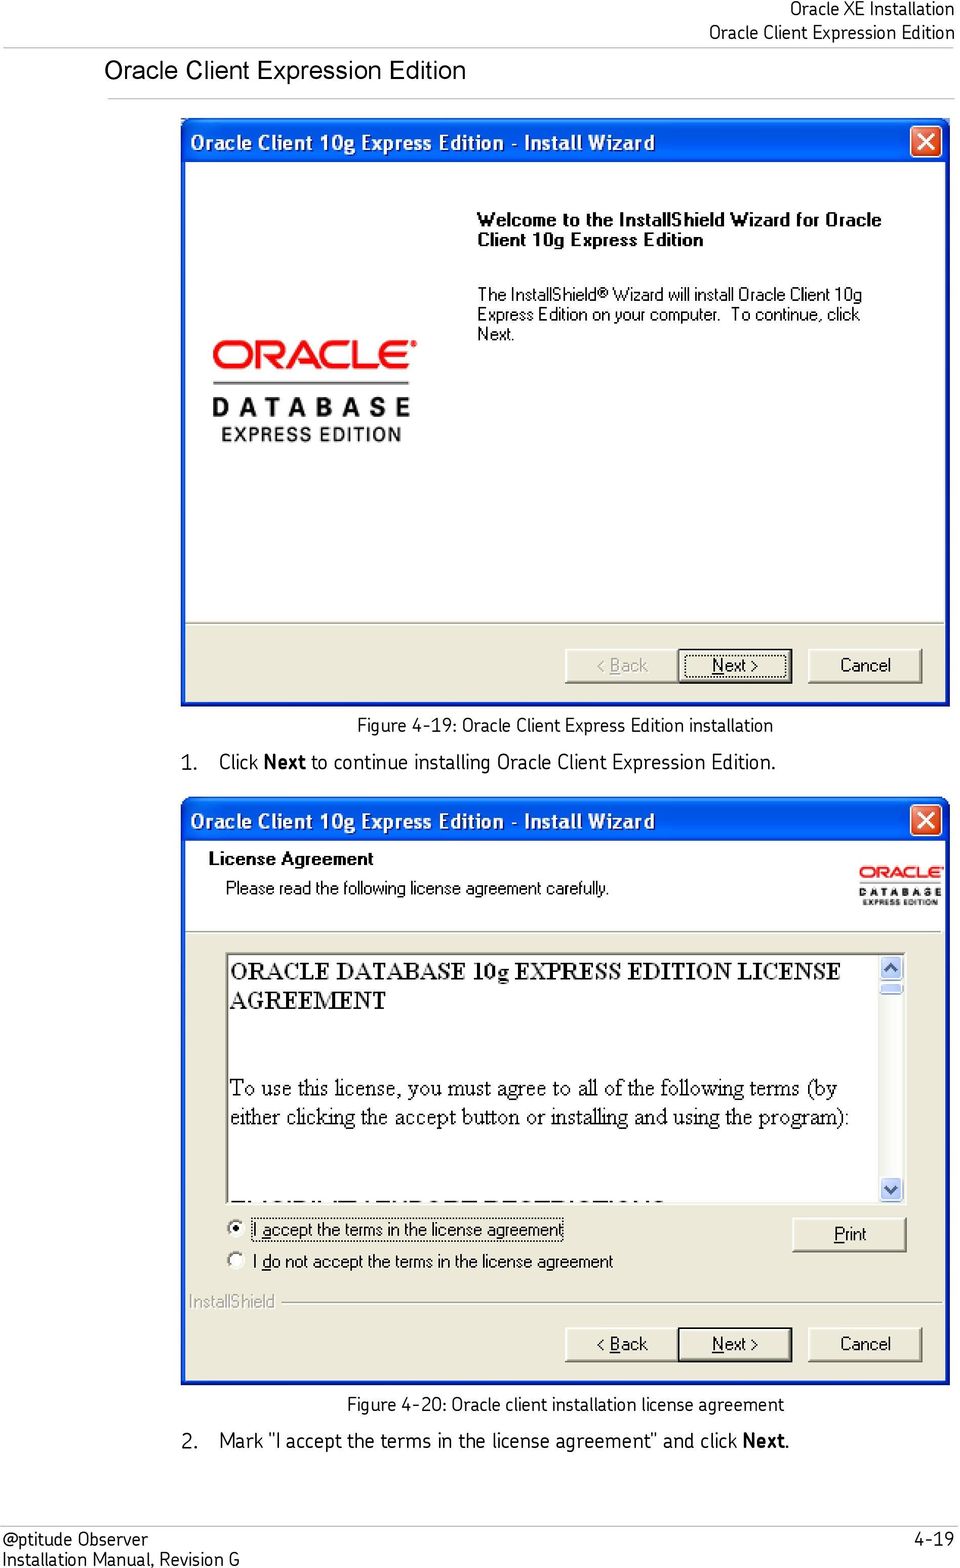 Click Next to continue installing Oracle Client Expression Edition.